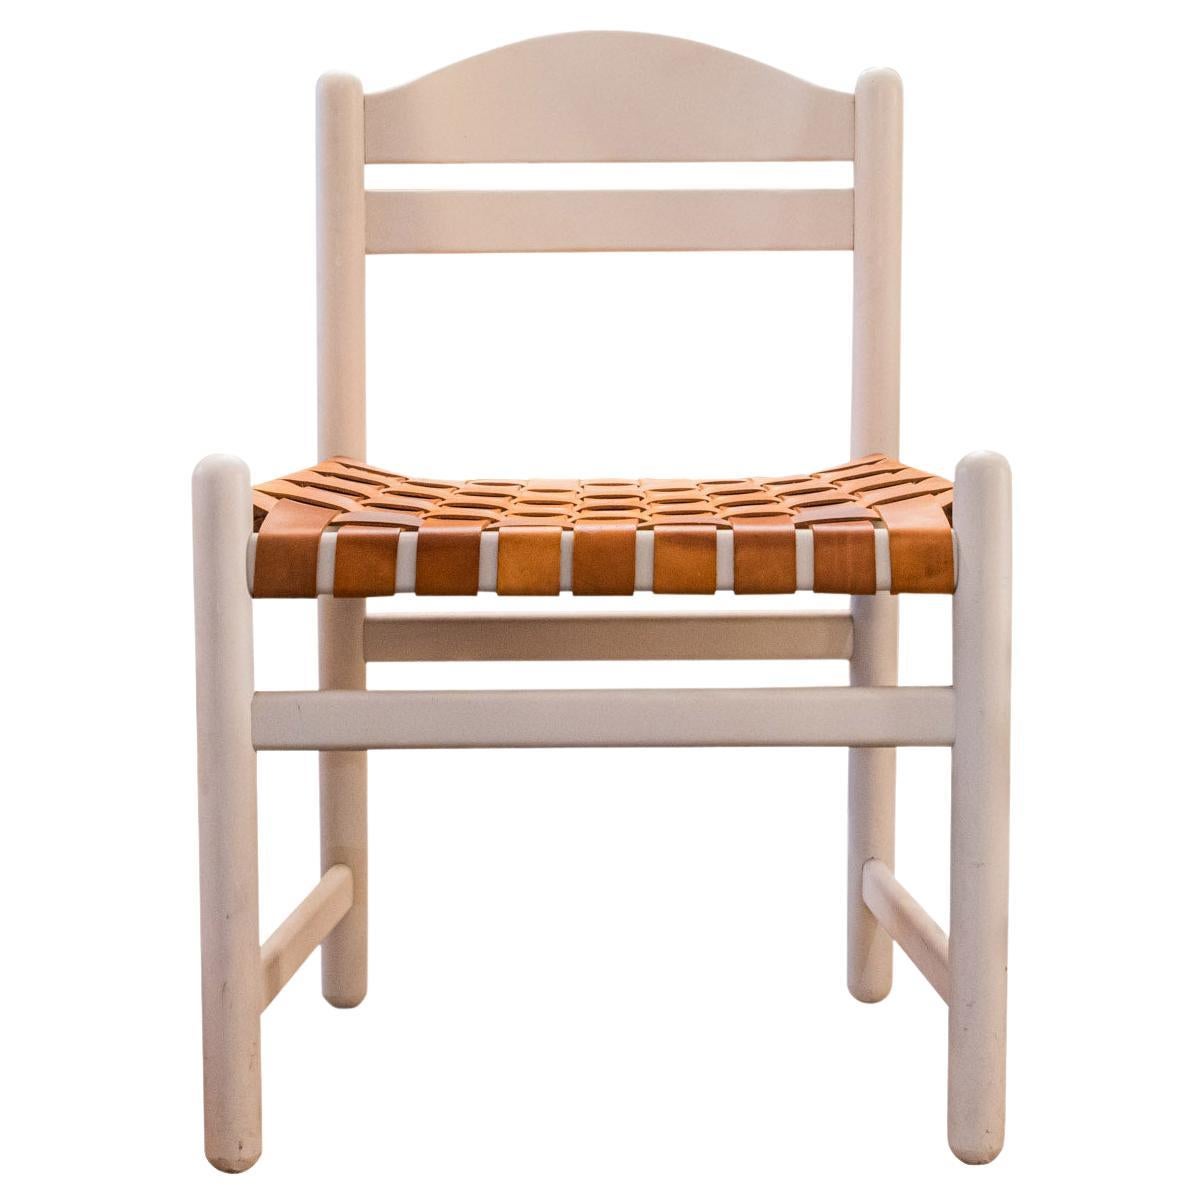 In the style of Carlo Scarpa, Suite of four chairs,
White lacquered wood,
Braided leather seat,
Rounded anterior and posterior uprights,
Lightly violated backrest,
circa 1970, Italy.

Measures : Height 77,5 cm, Width 52,5 cm, Depth 39,5 cm.